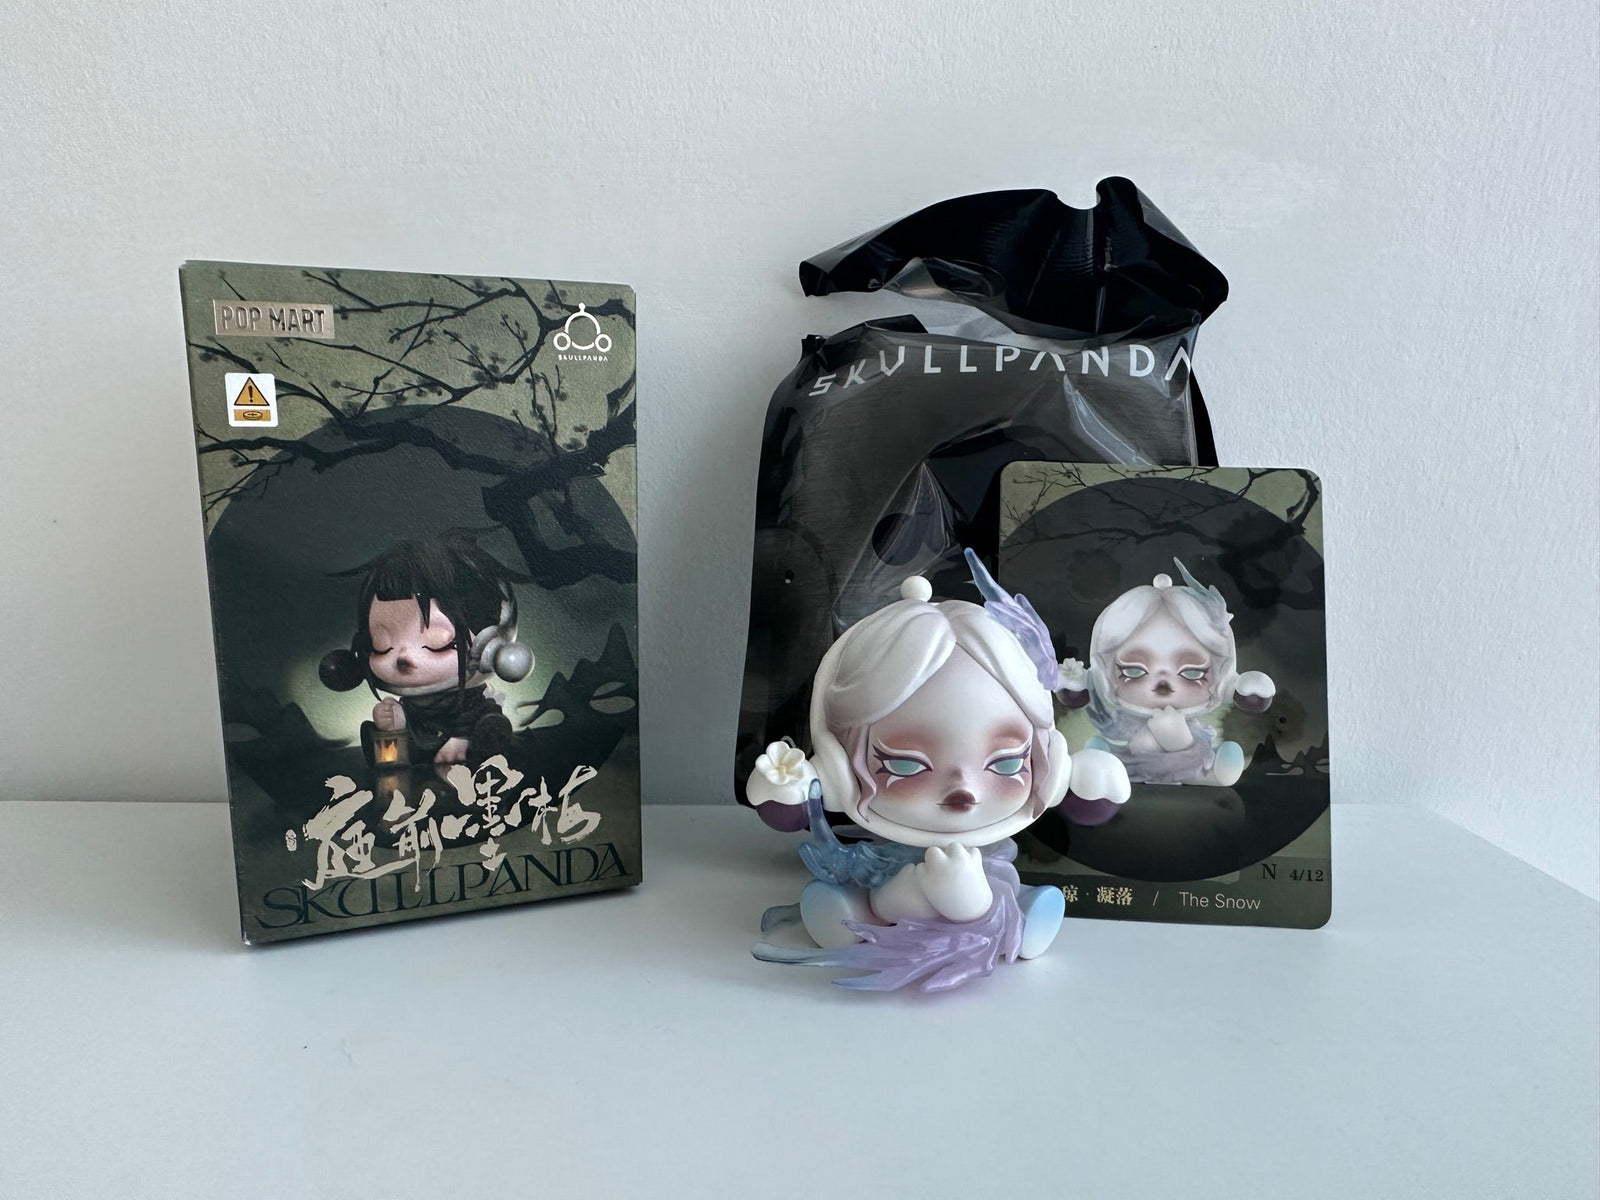 The Snow - SKULLPANDA The Ink Plum Blossom Series Figures by POP MART - 1